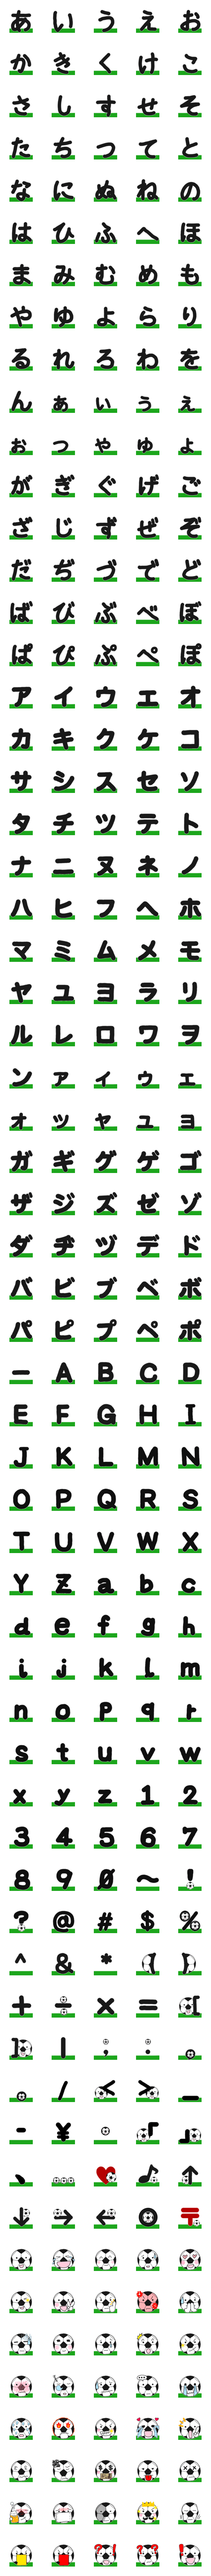 [LINE絵文字]ボールくん【サッカーボール】の画像一覧